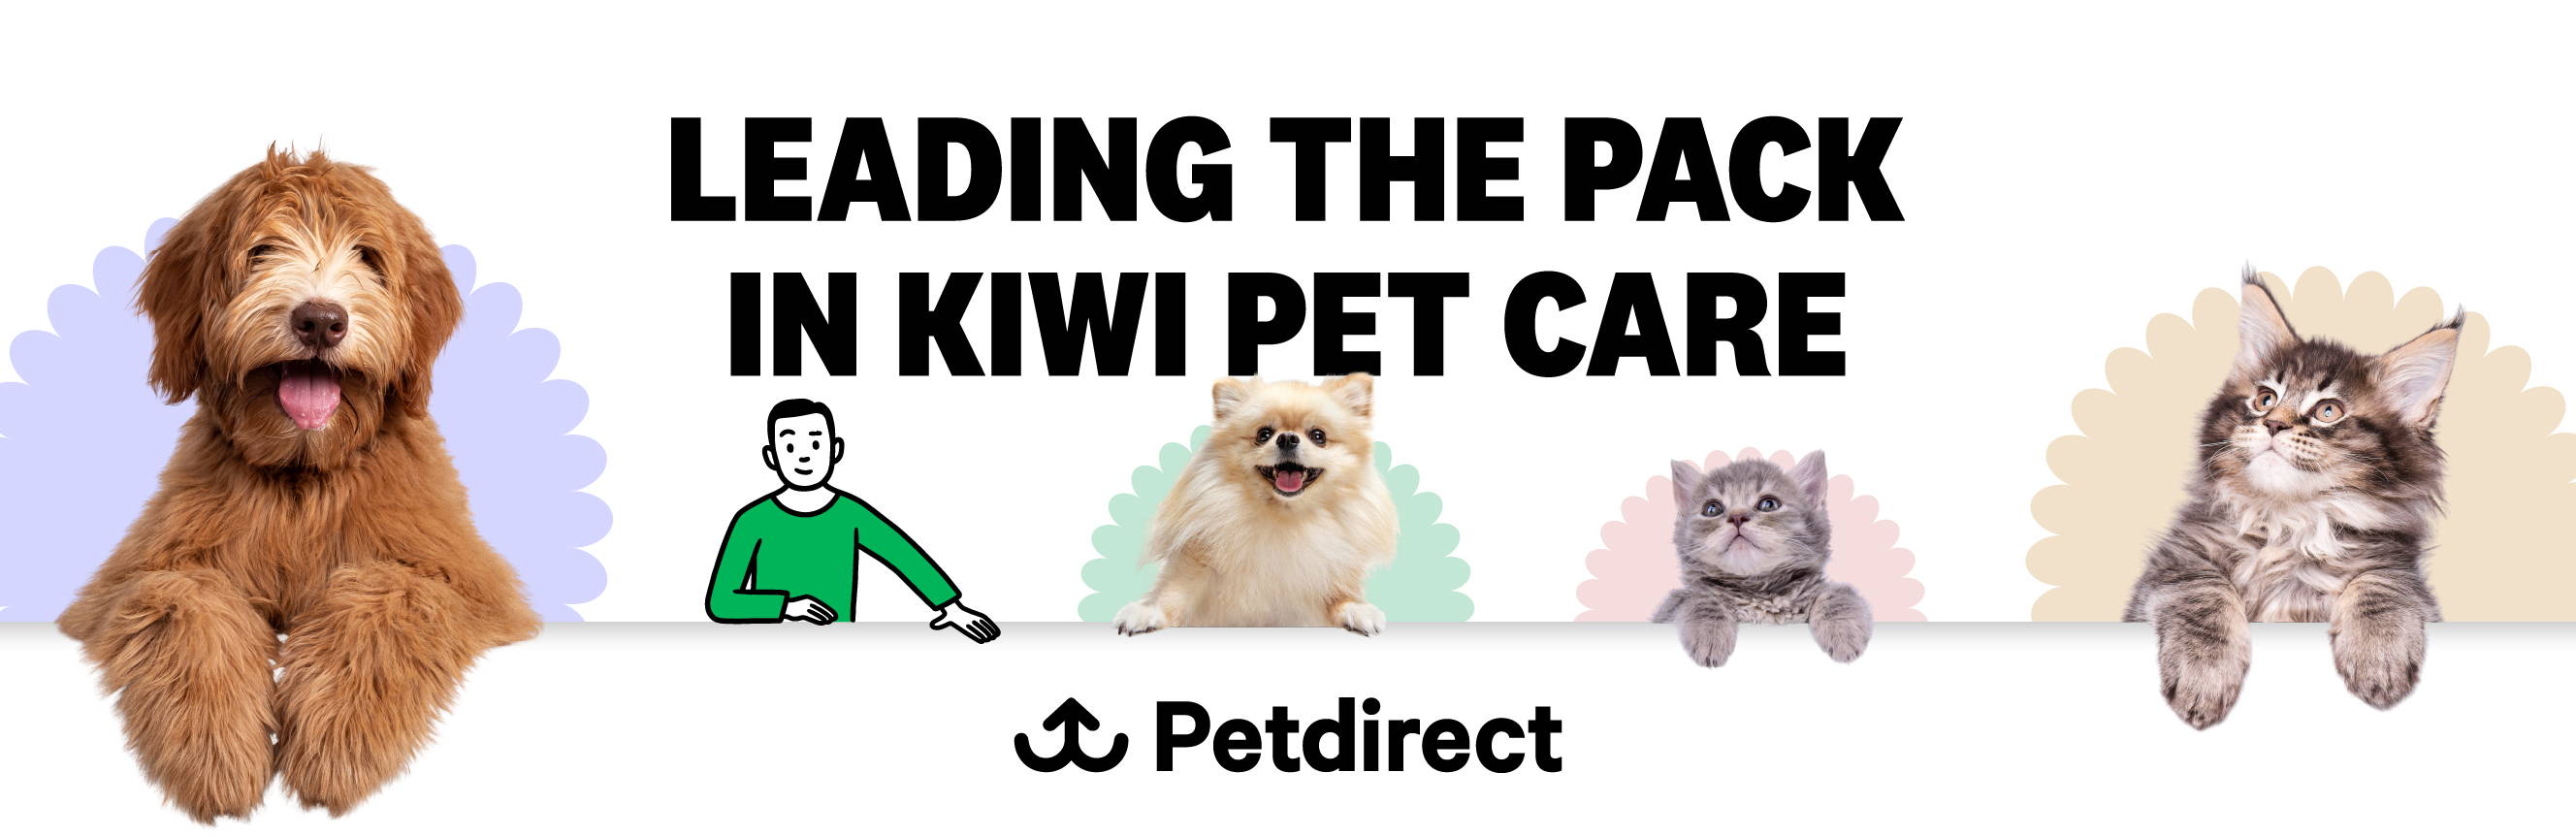 Petdirect | Leading the pack in Kiwi Pet Care